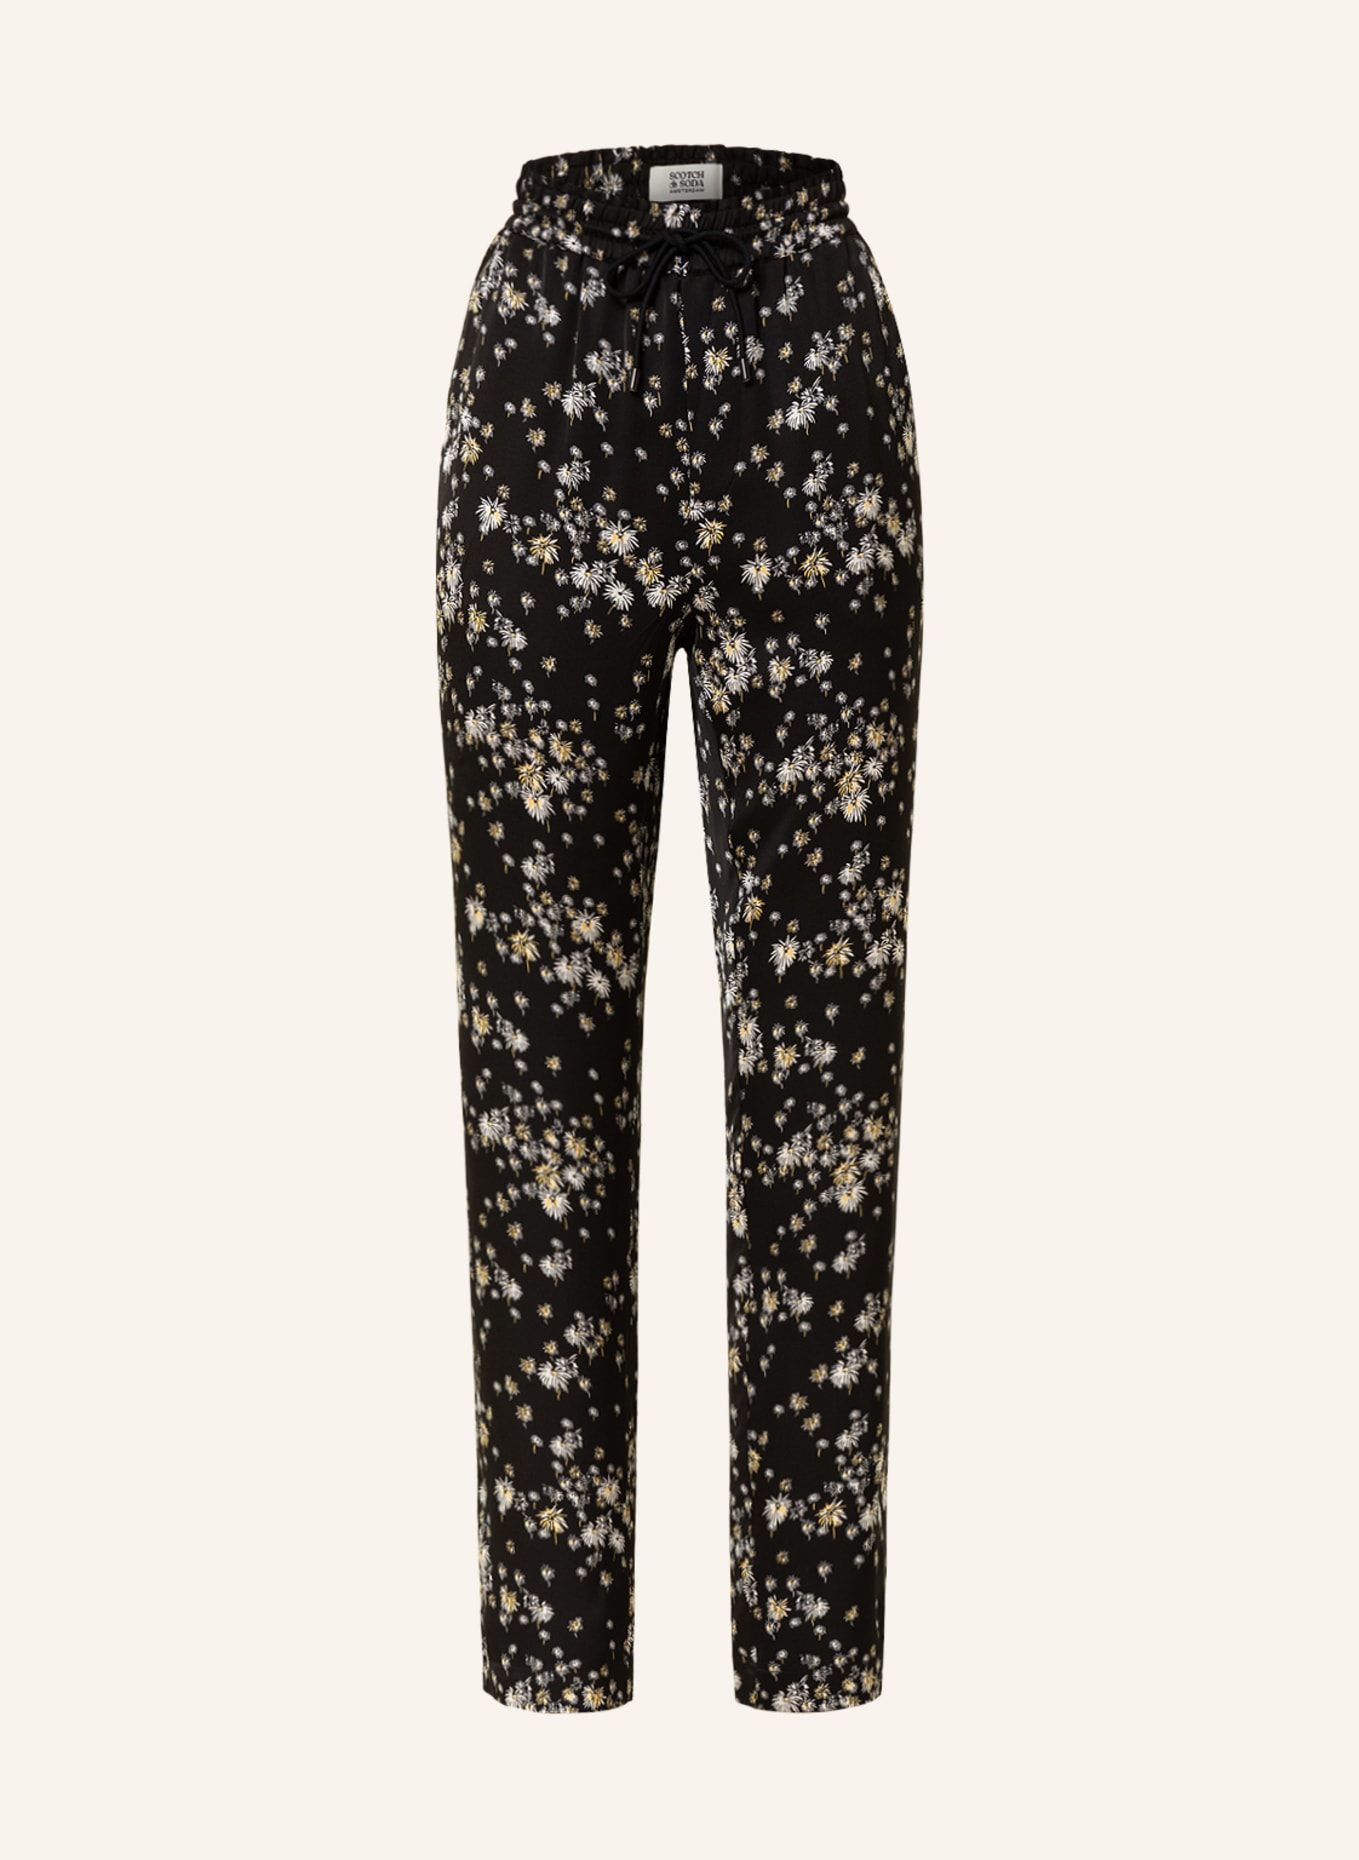 SCOTCH & SODA Trousers NINA in jogger style, Color: BLACK/ WHITE/ LIGHT YELLOW (Image 1)